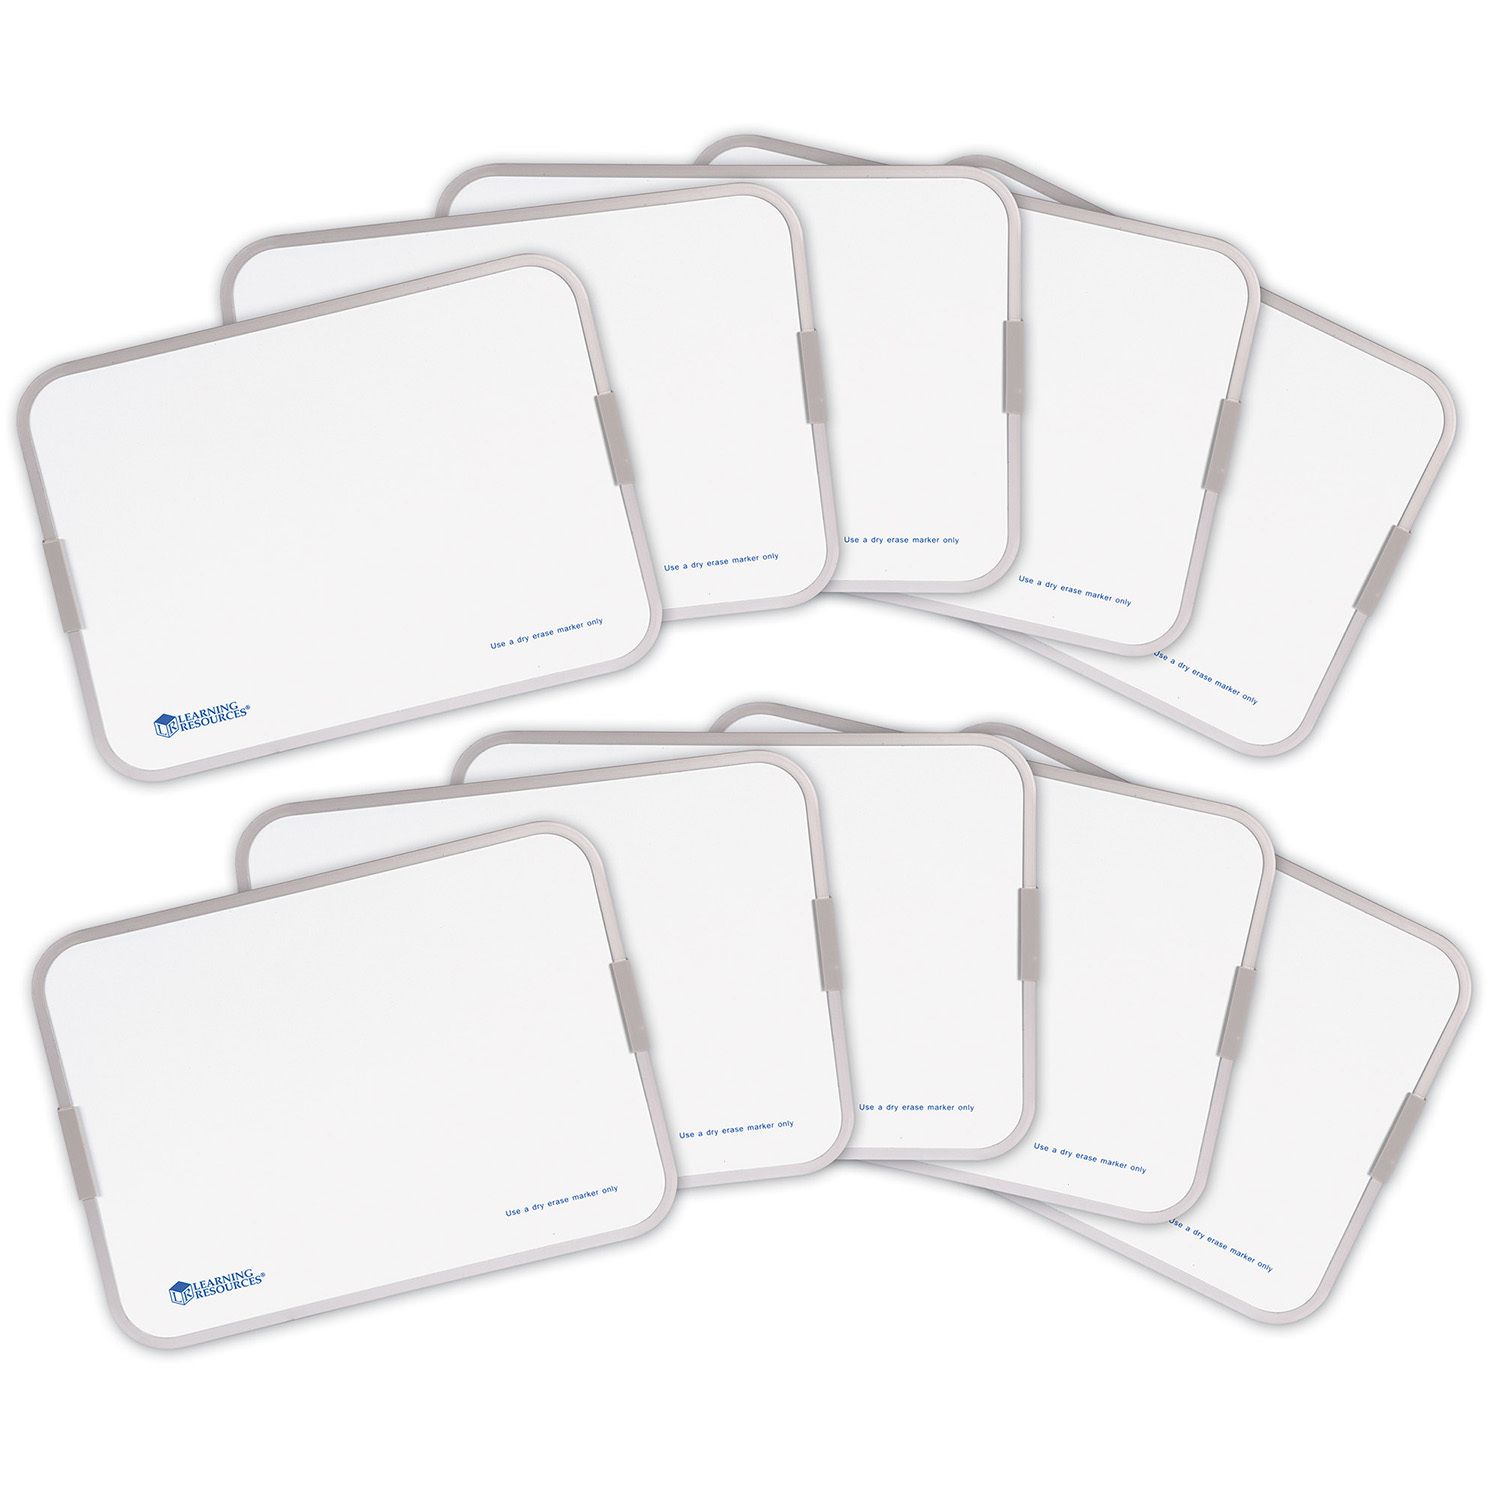 Image for Learning Resources Magnetic Double-Sided Dry-Erase Boards, Set of 10 at Kohl's.